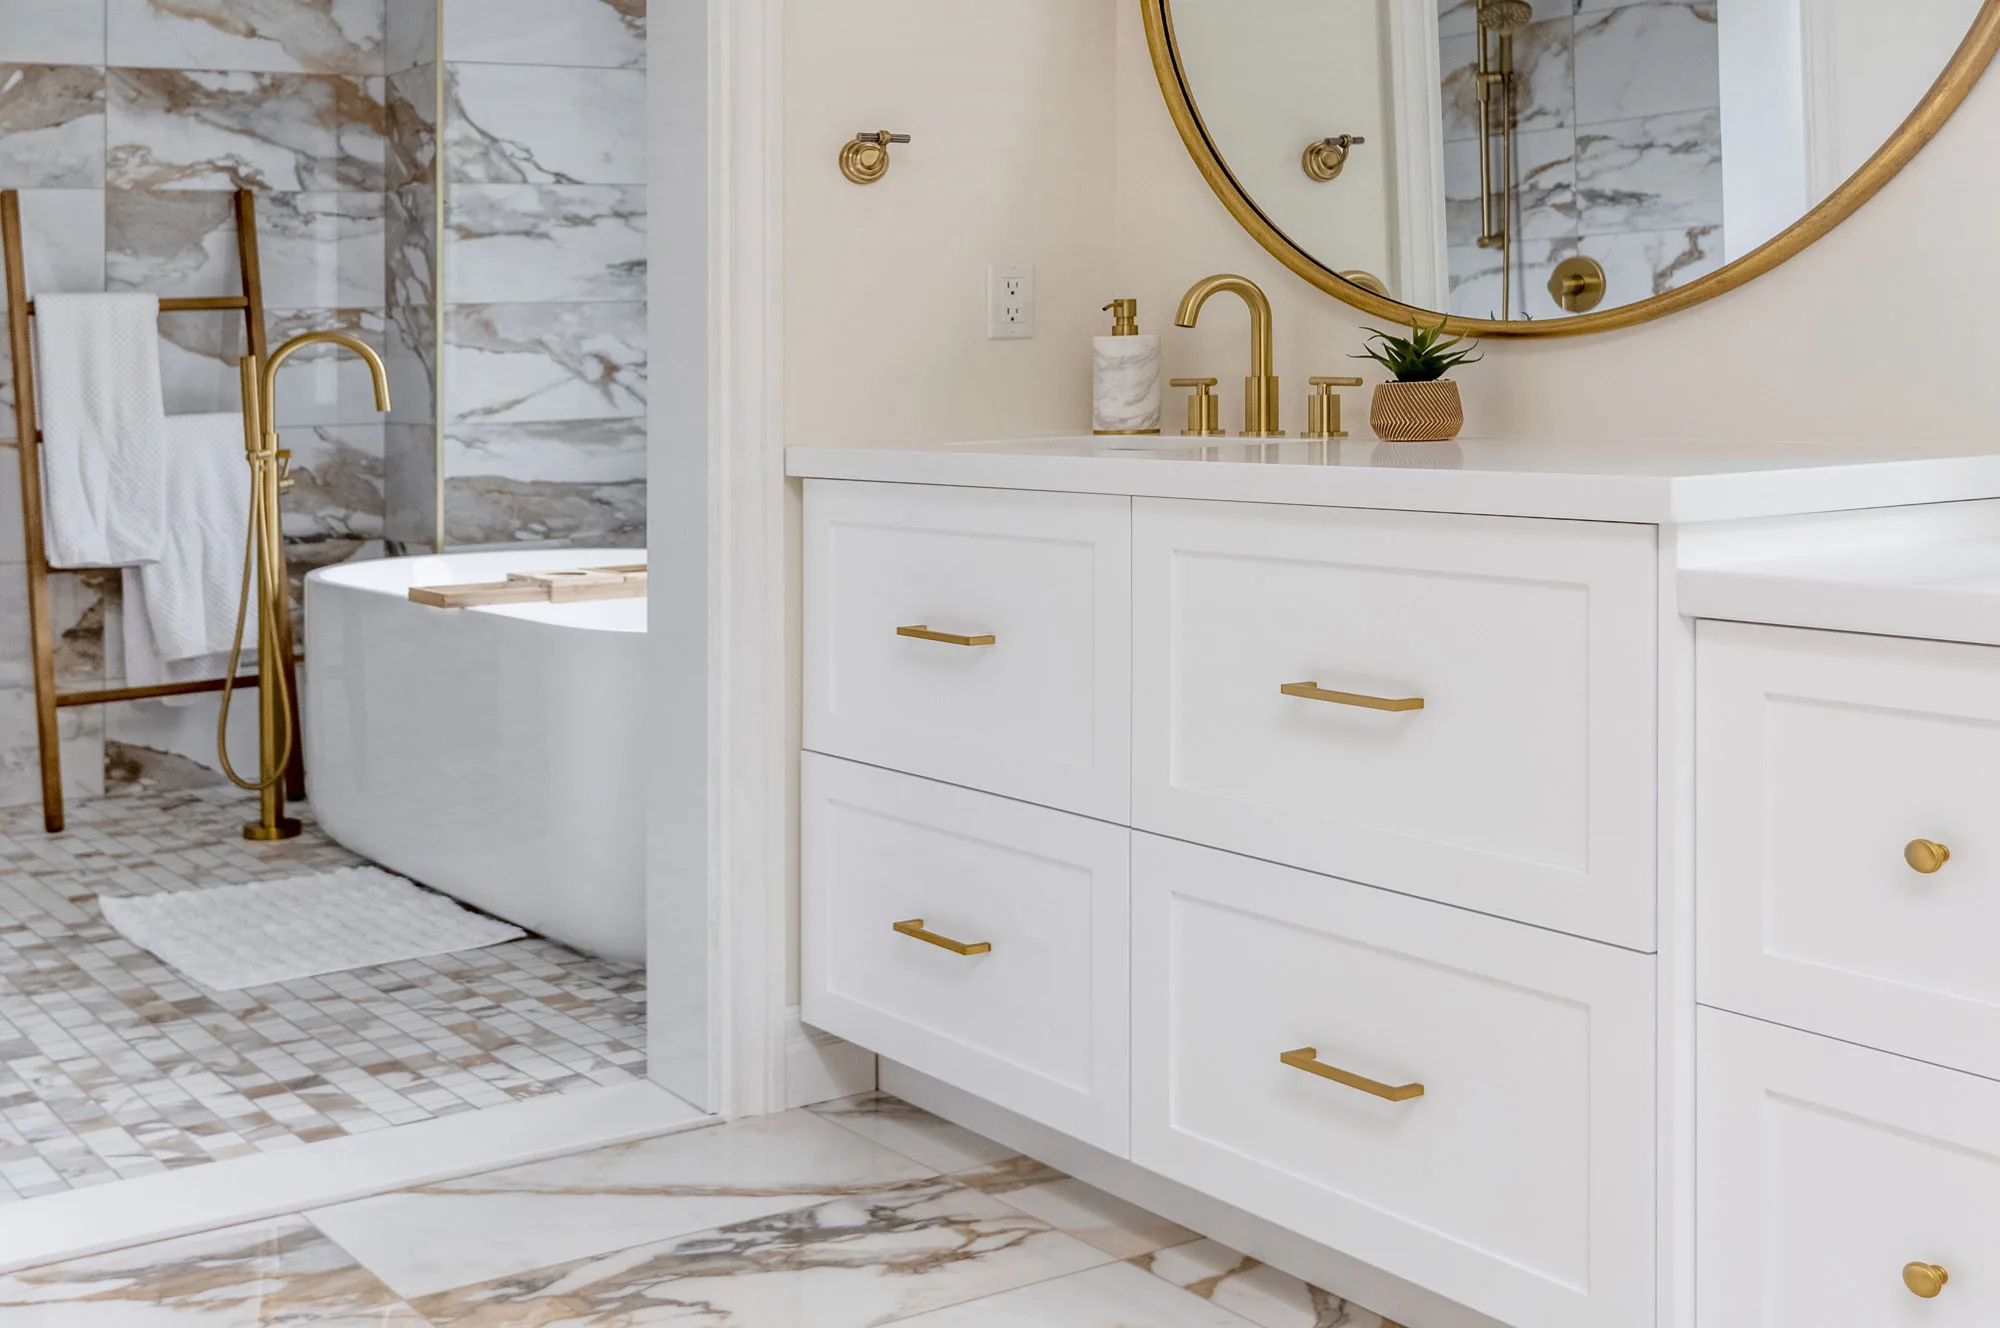 A close up of a white cupboard bathroom accented with gold handles and gold trimmed mirror along with gold faucets.